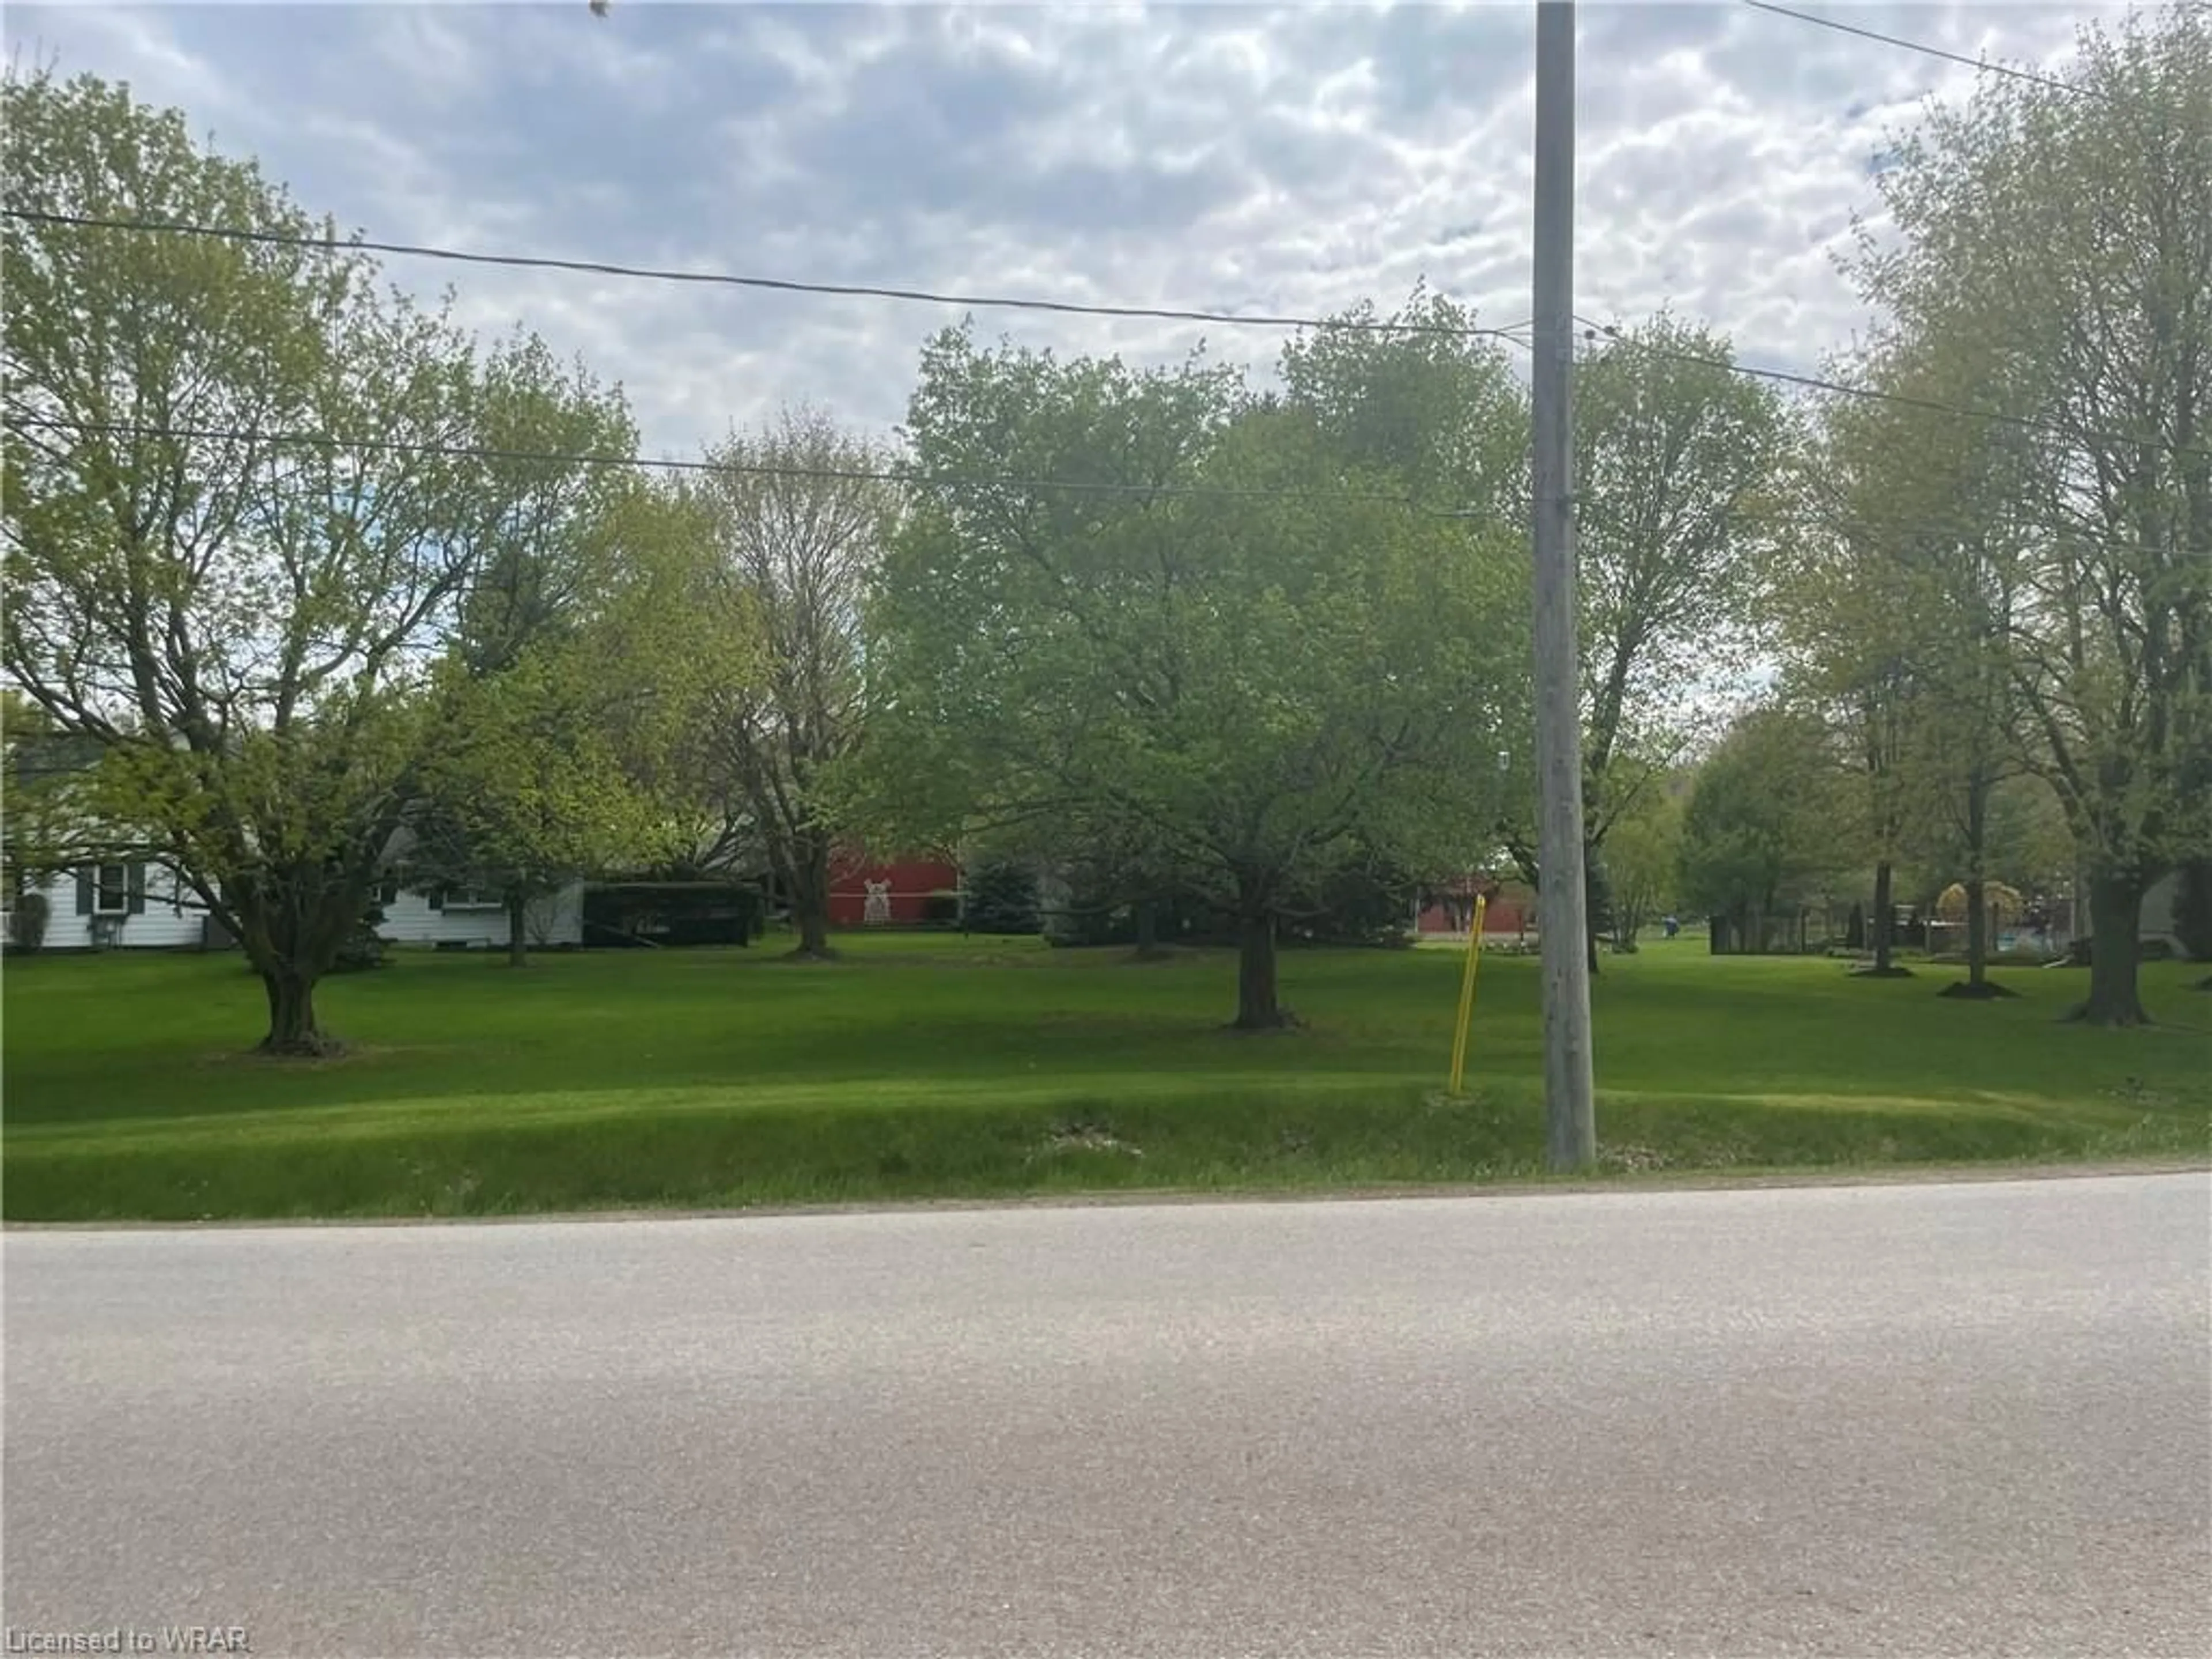 Street view for 1681 King St, St. Jacobs Ontario N0B 2N0